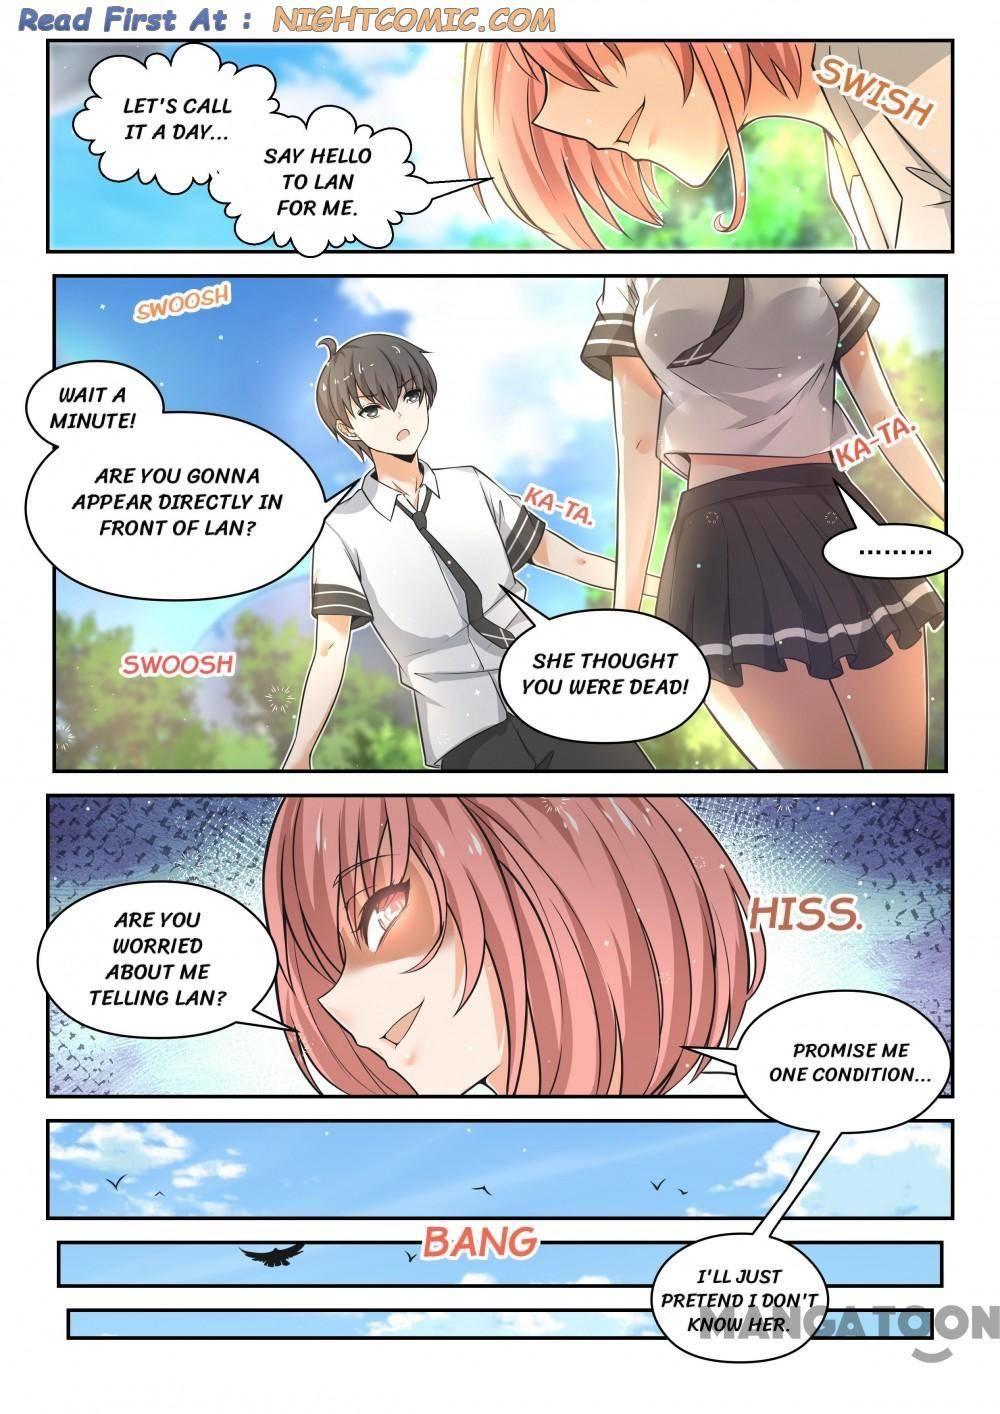 The Boy In The All-Girls School Chapter 473 page 9 - Mangakakalot